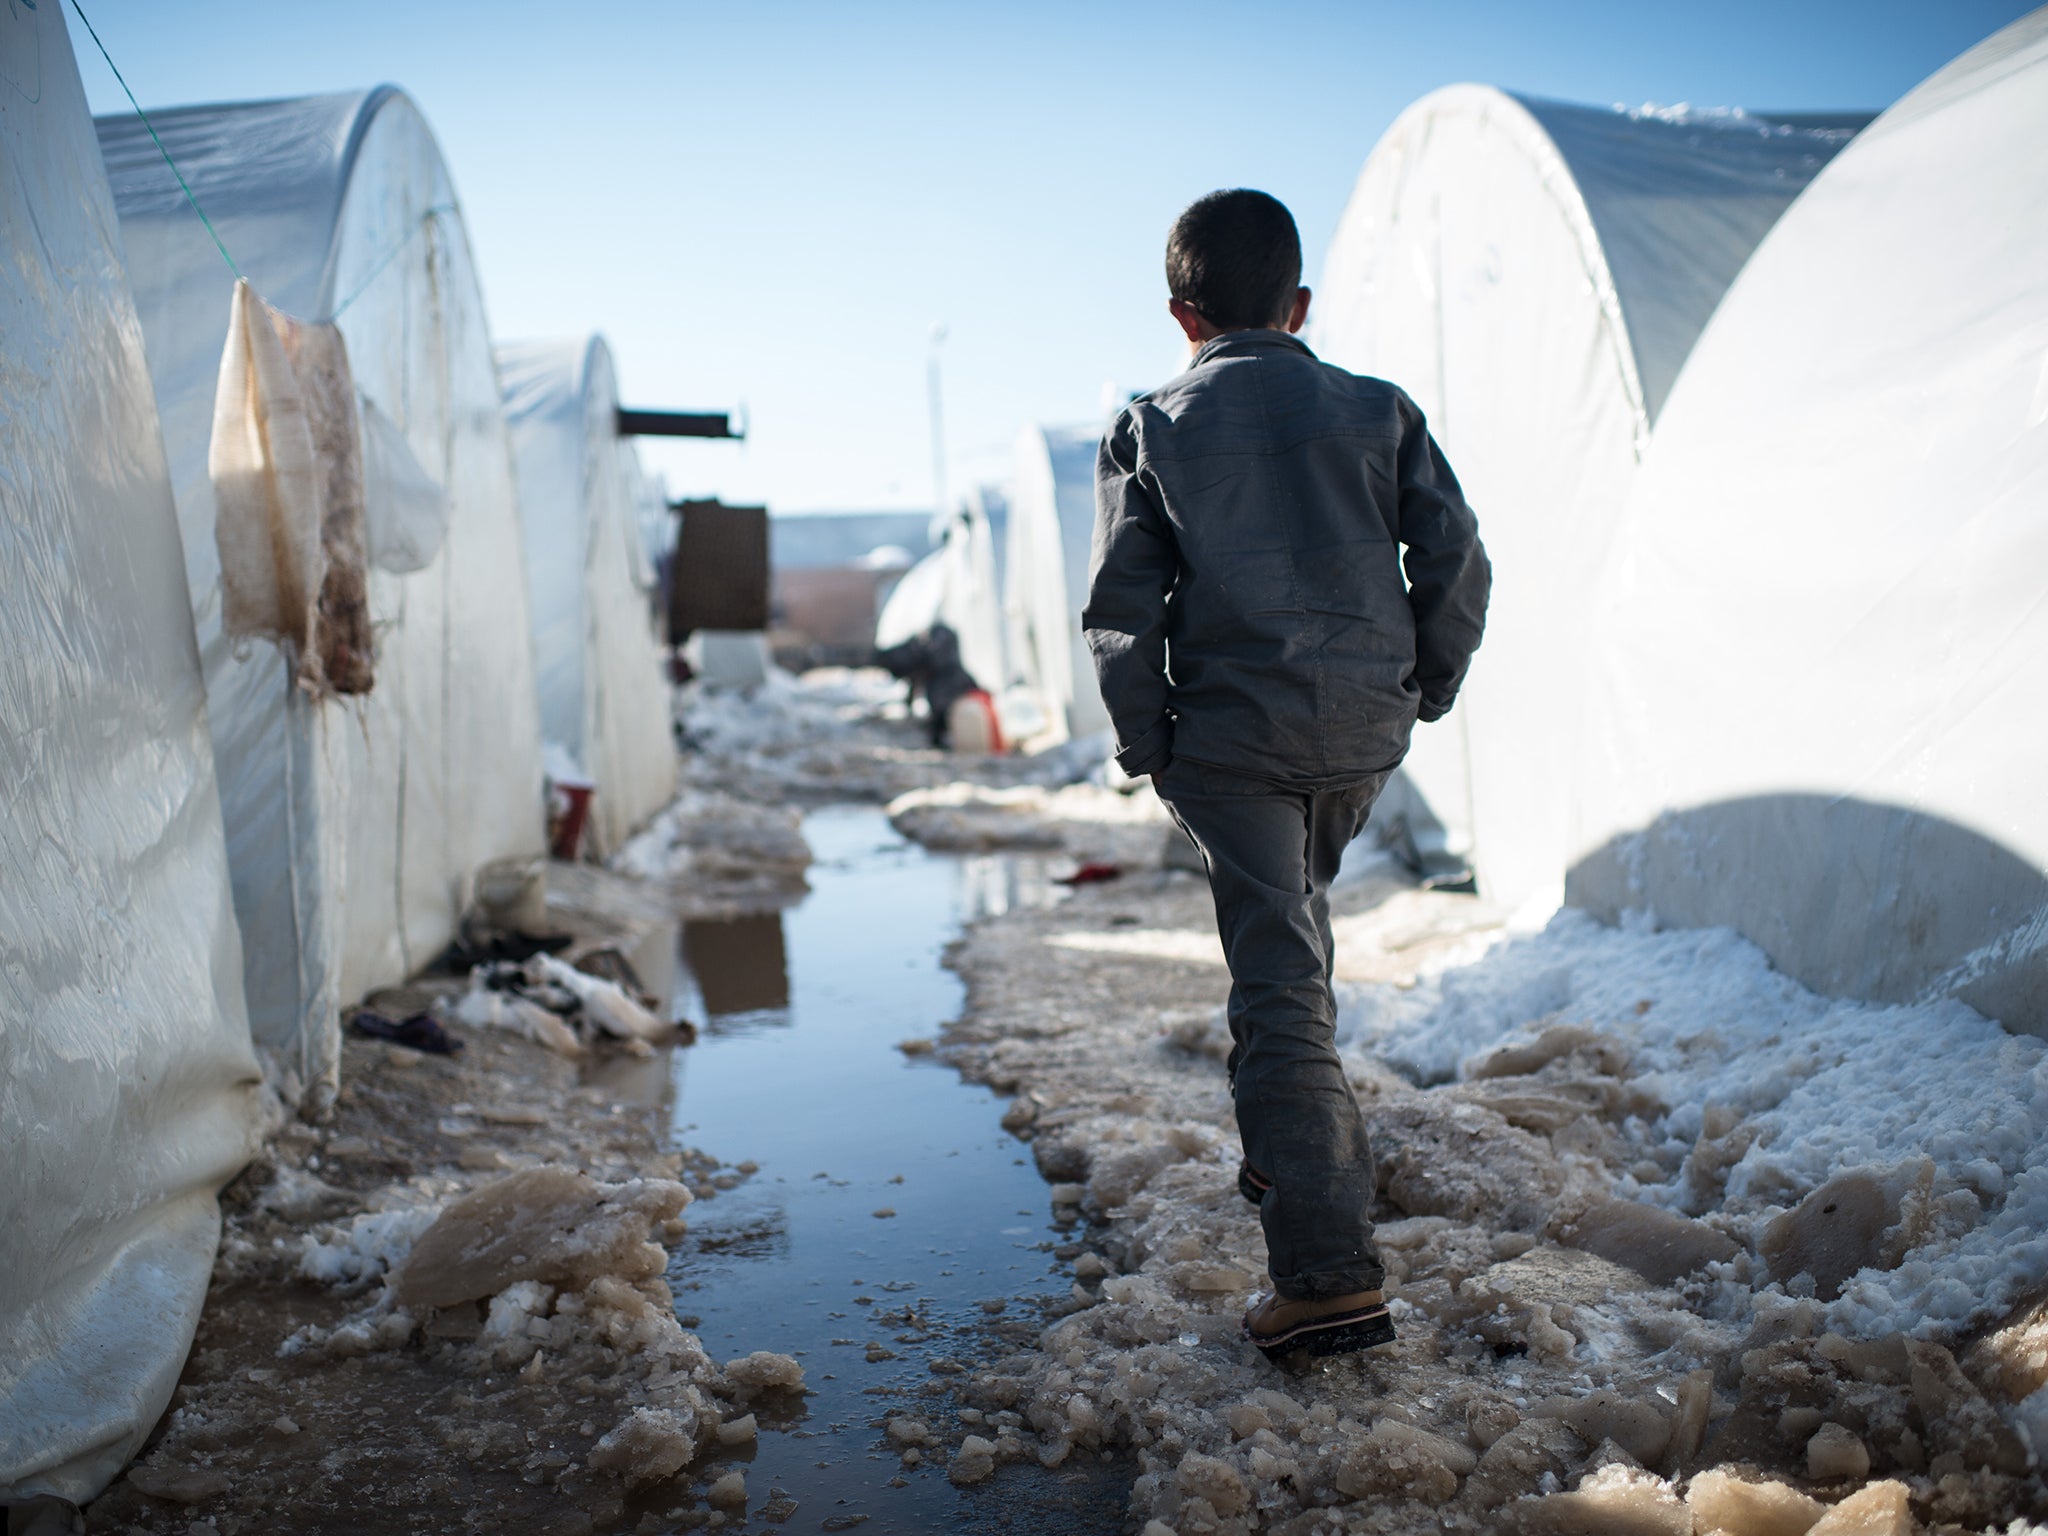 Refugee camps in Lebanon and Turkey have endured freezing temperatures and difficult weather conditions in past years